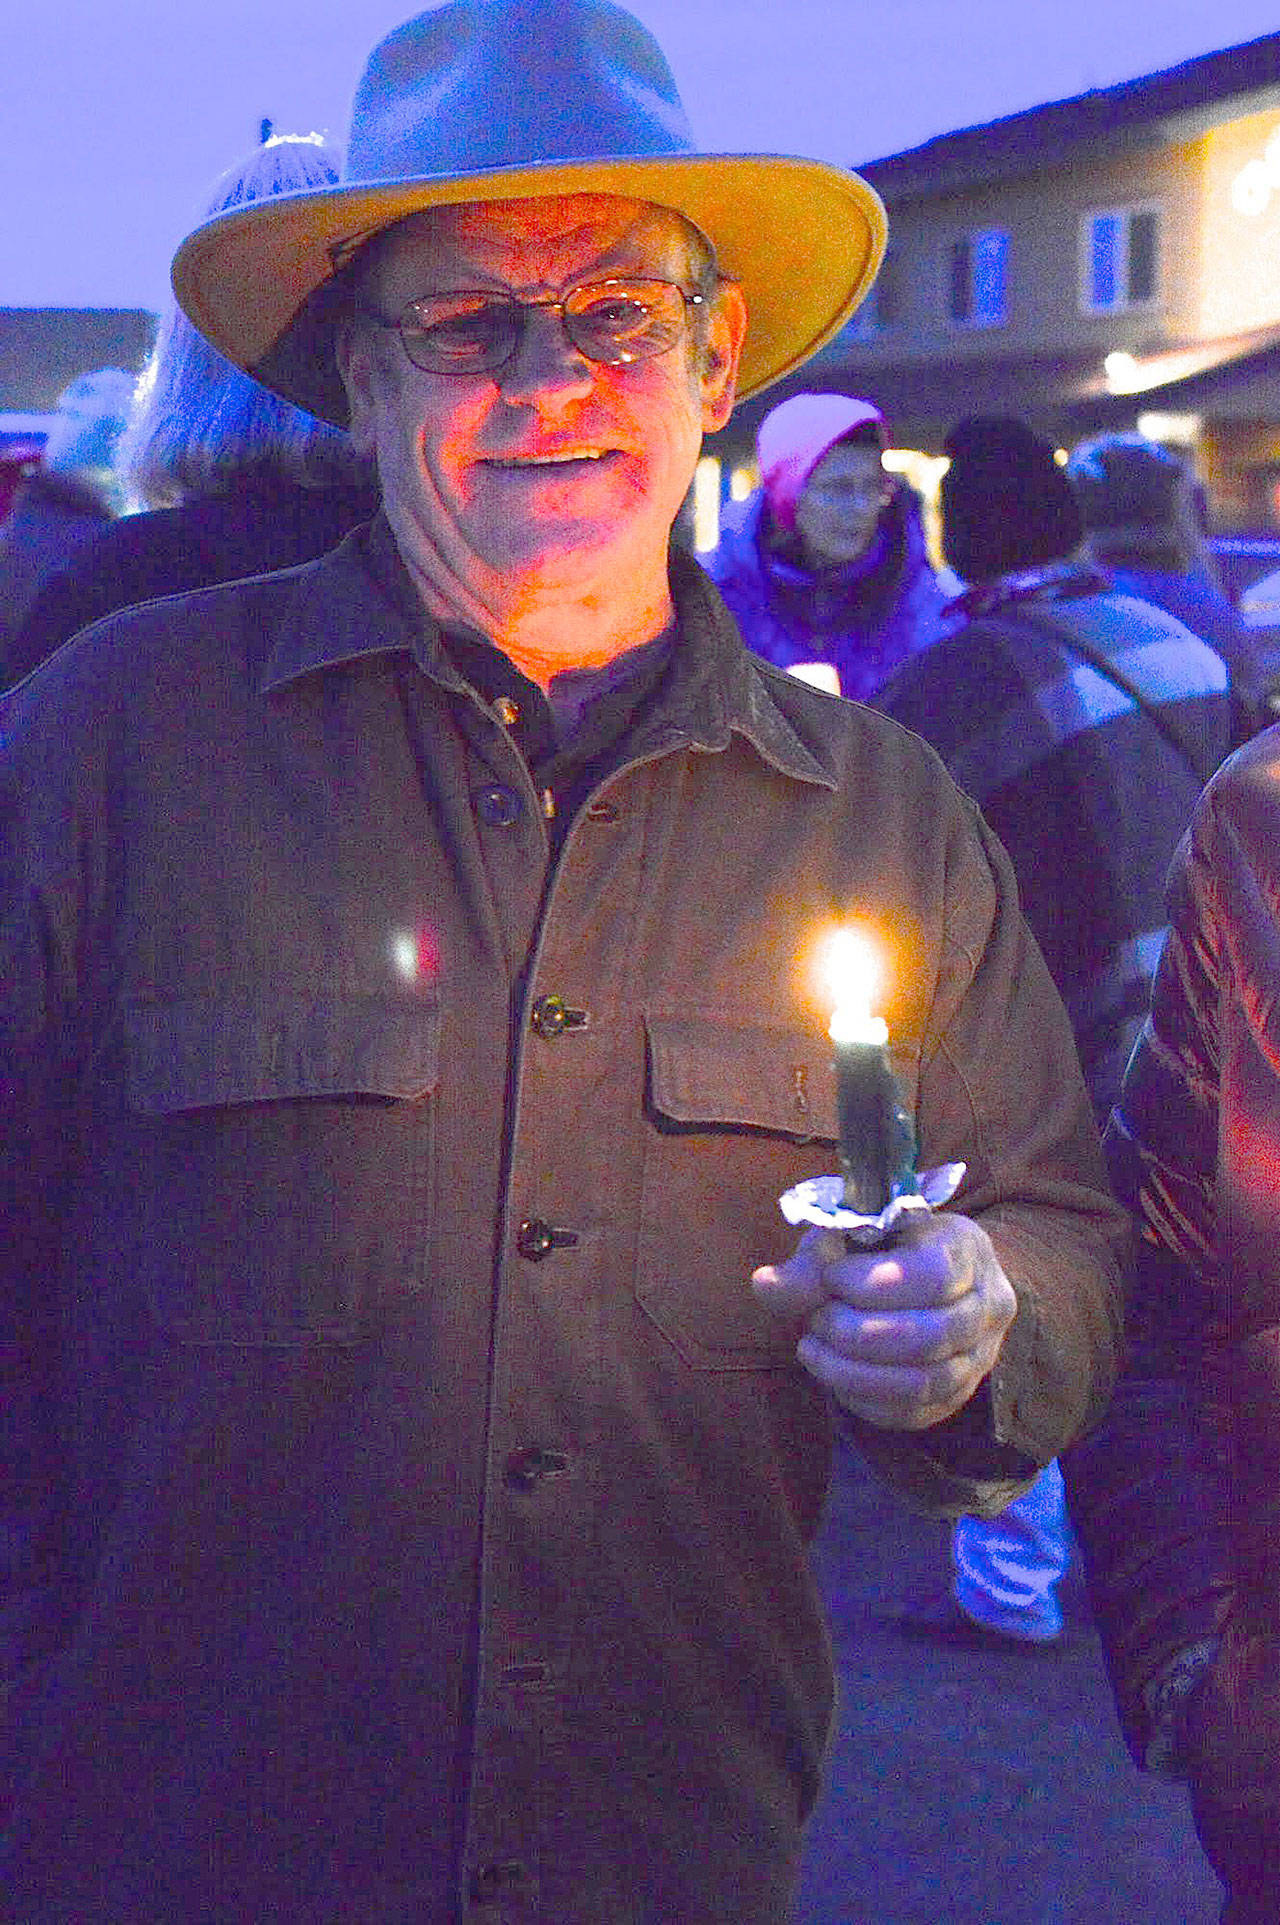 Sequim resident Dan Long was among the candle carriers in a vigil held Saturday in downtown Sequim. (Diane Urbani de la Paz/for Peninsula Daily News)